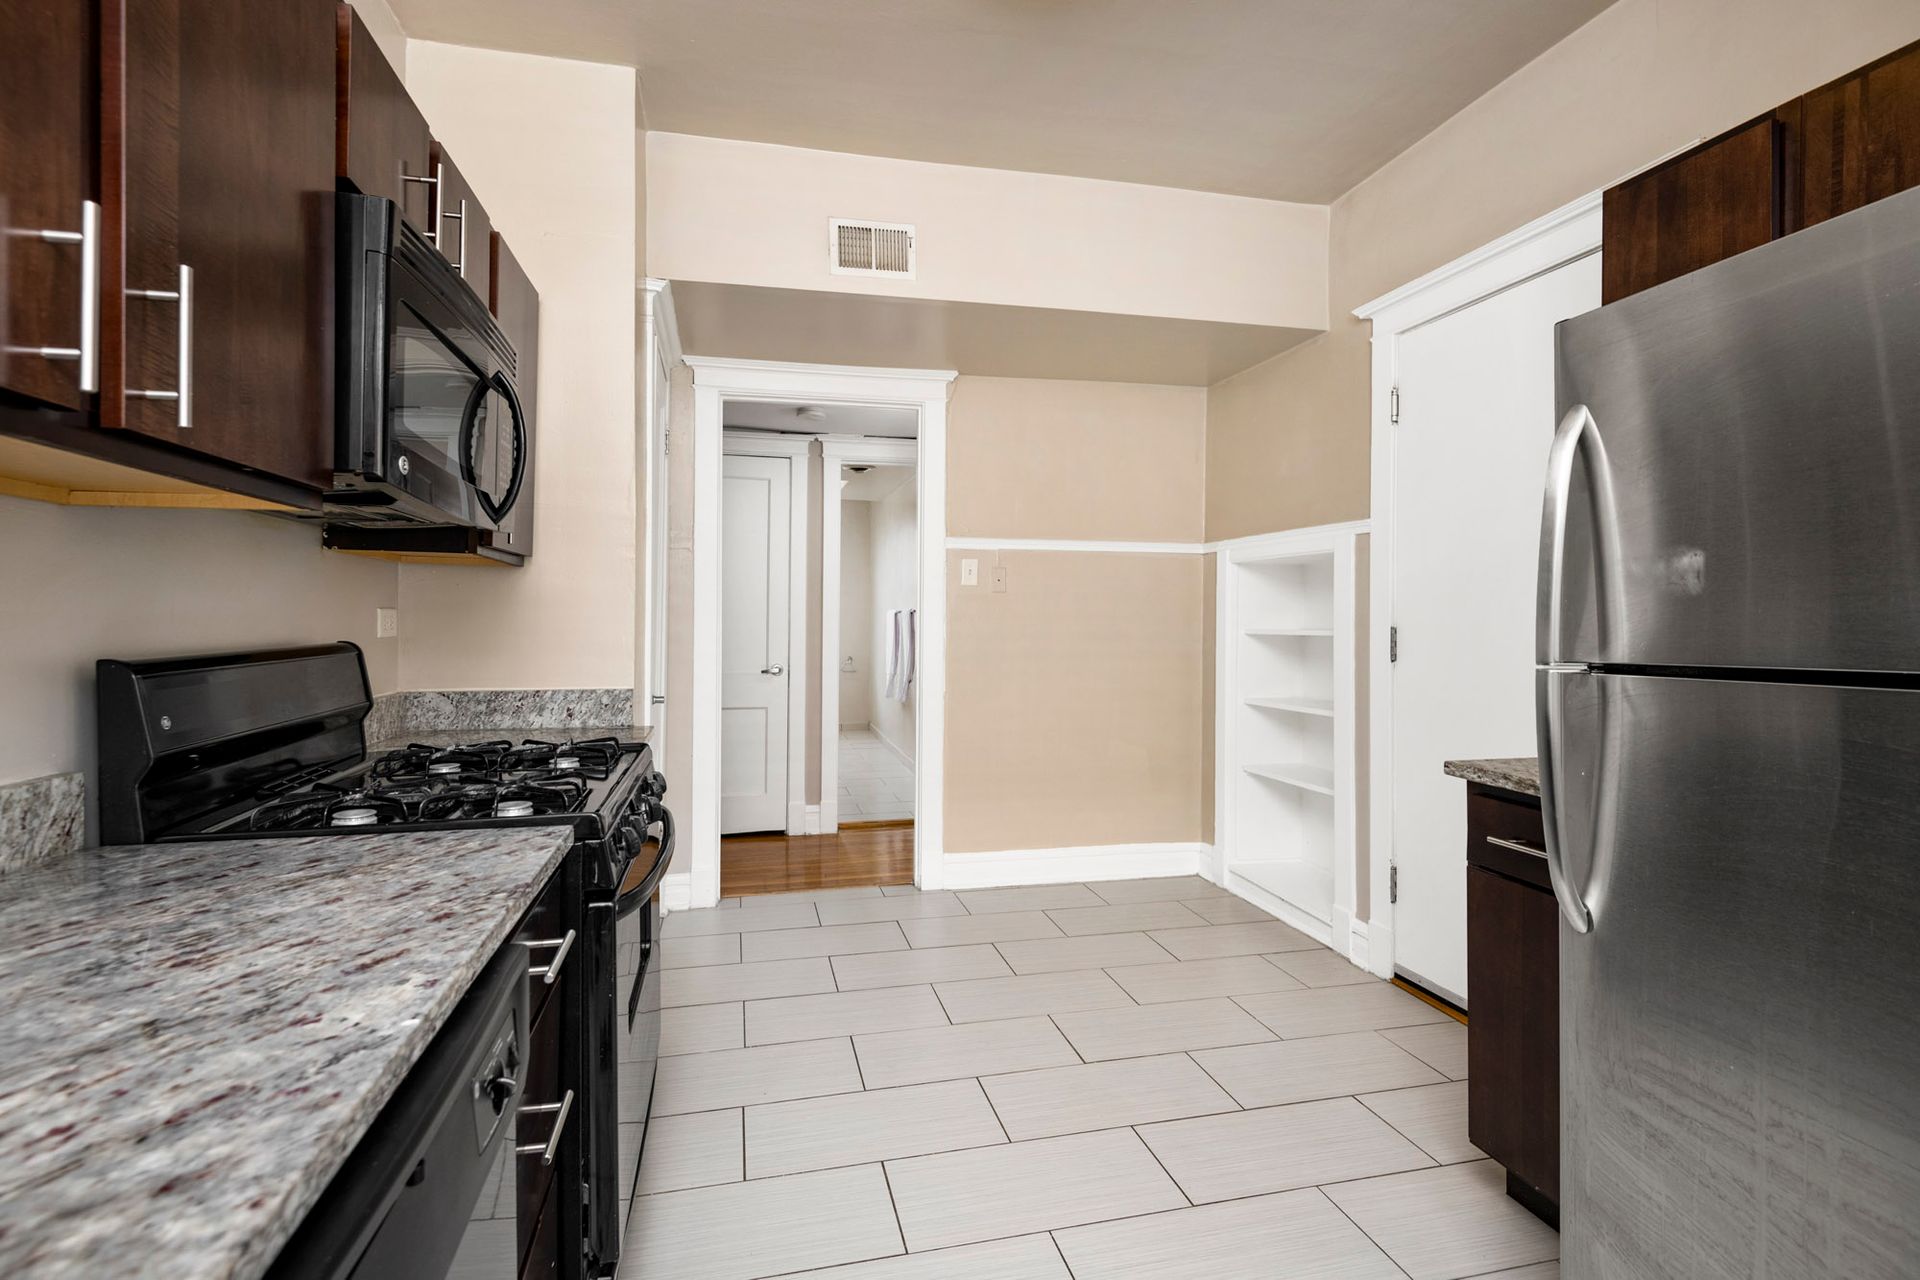 A kitchen with stainless steel appliances and granite counter tops at Reside on Irving Park.